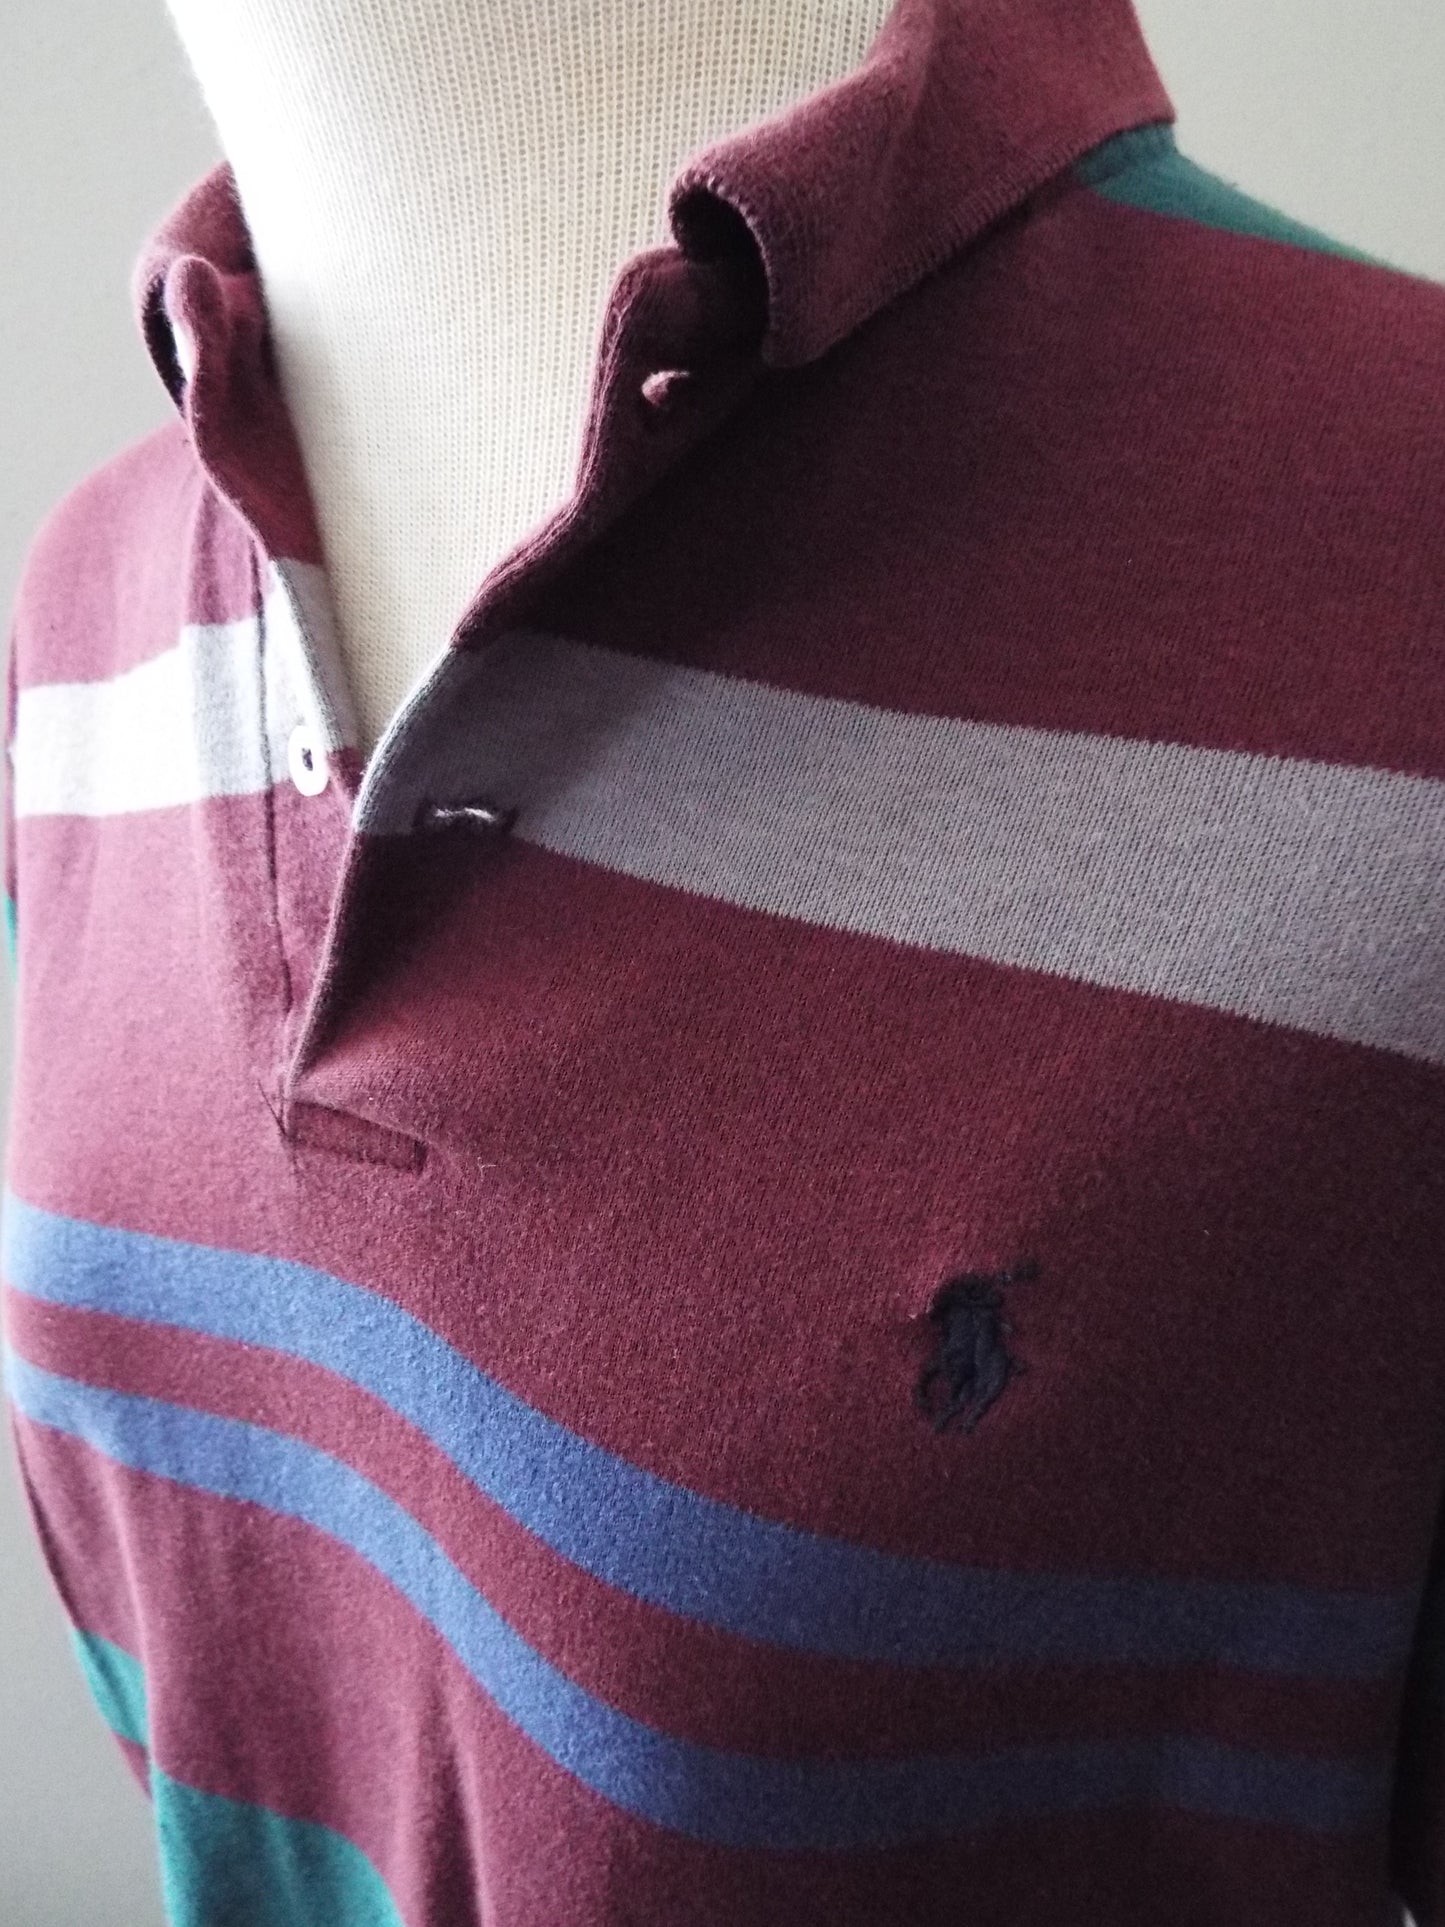 Vintage Short Sleeve Striped Polo Shirt by Ralph Lauren